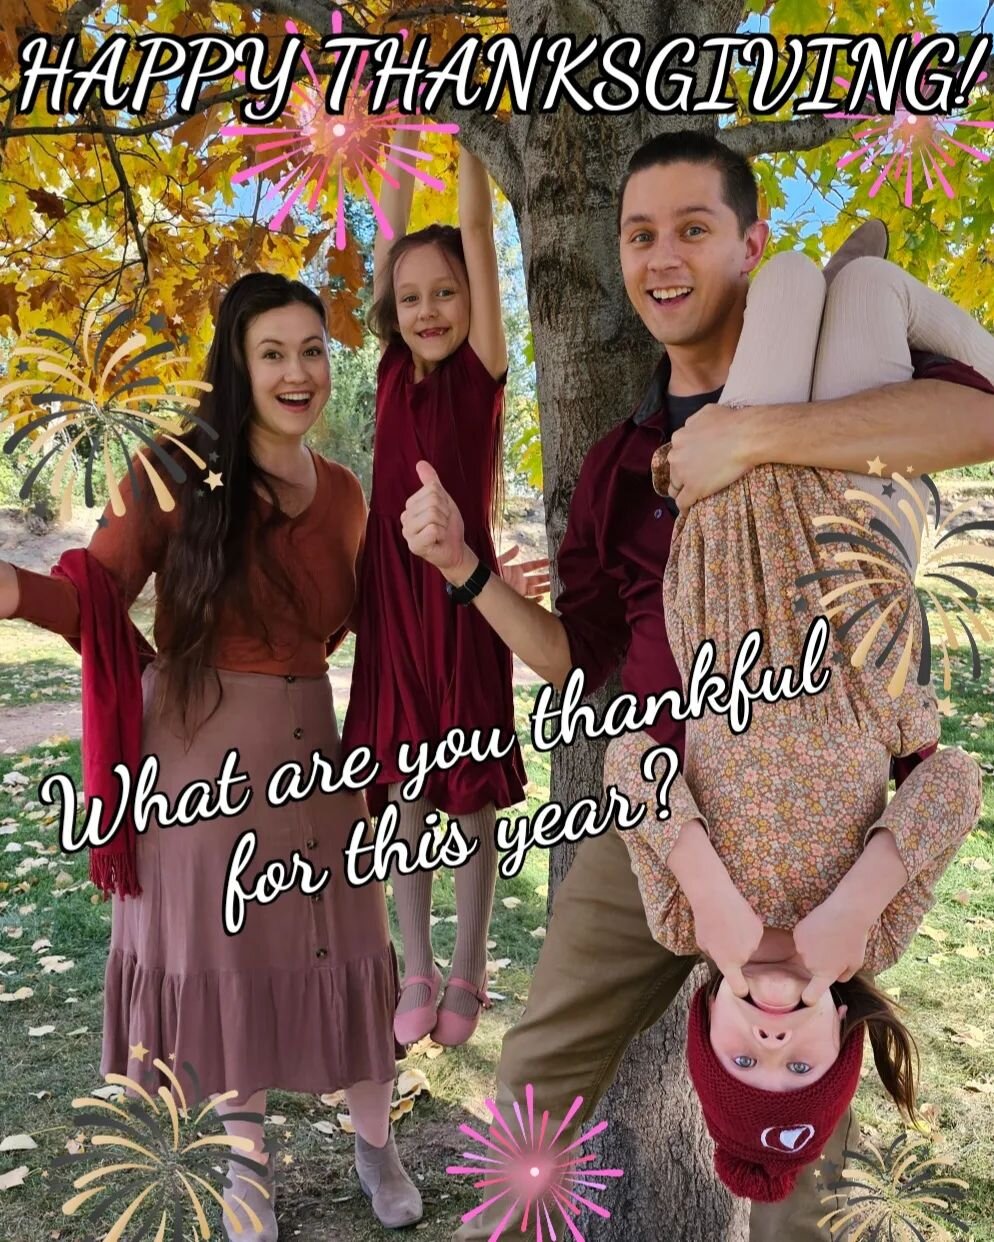 Happy Thanksgiving from the Cucjen Family! What are you thankful for this year?